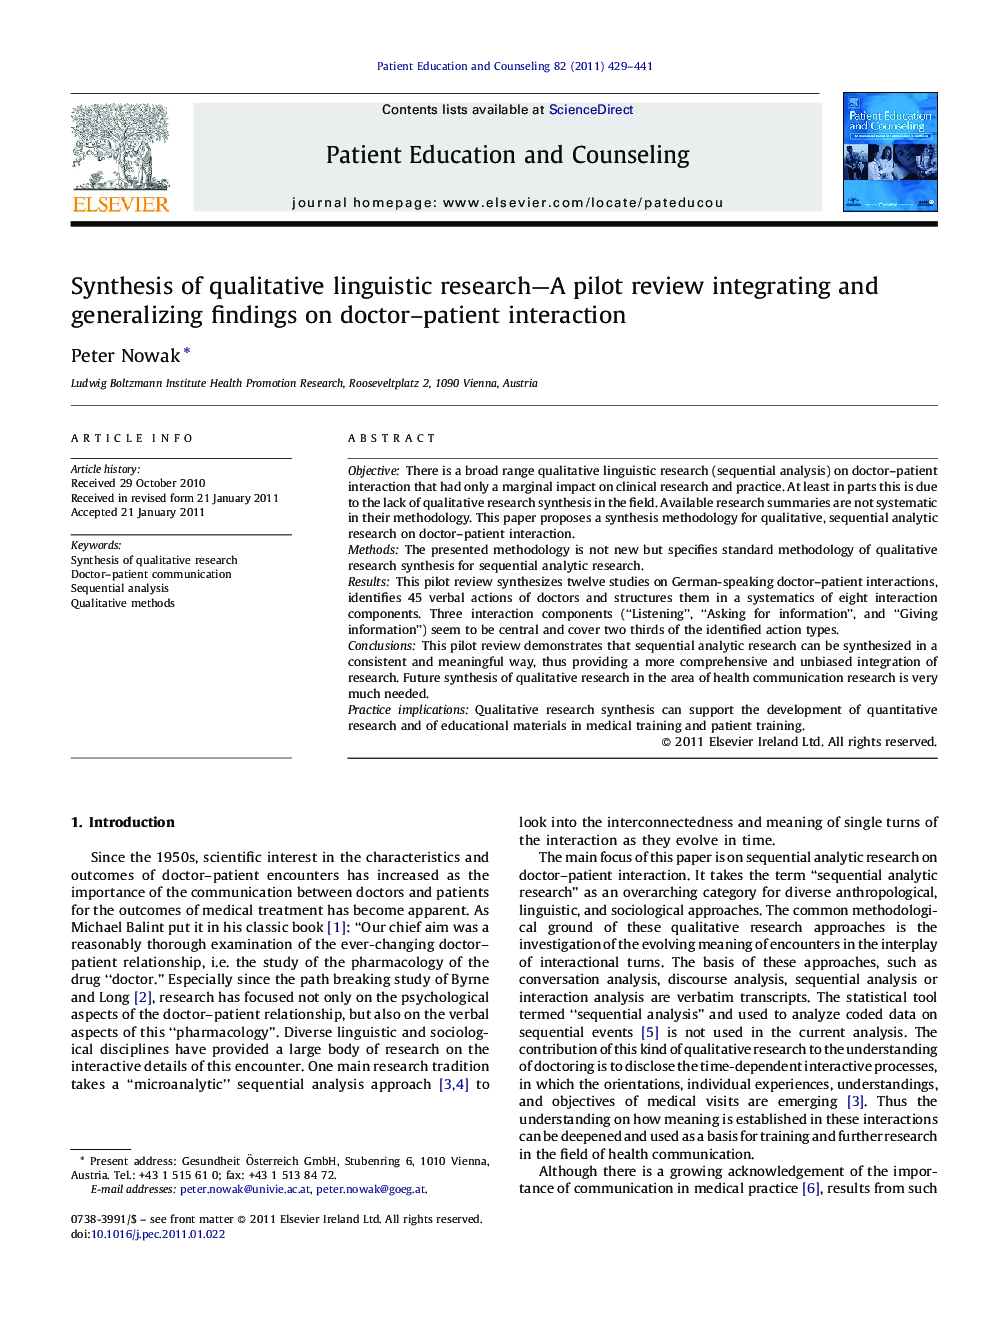 Synthesis of qualitative linguistic research—A pilot review integrating and generalizing findings on doctor–patient interaction